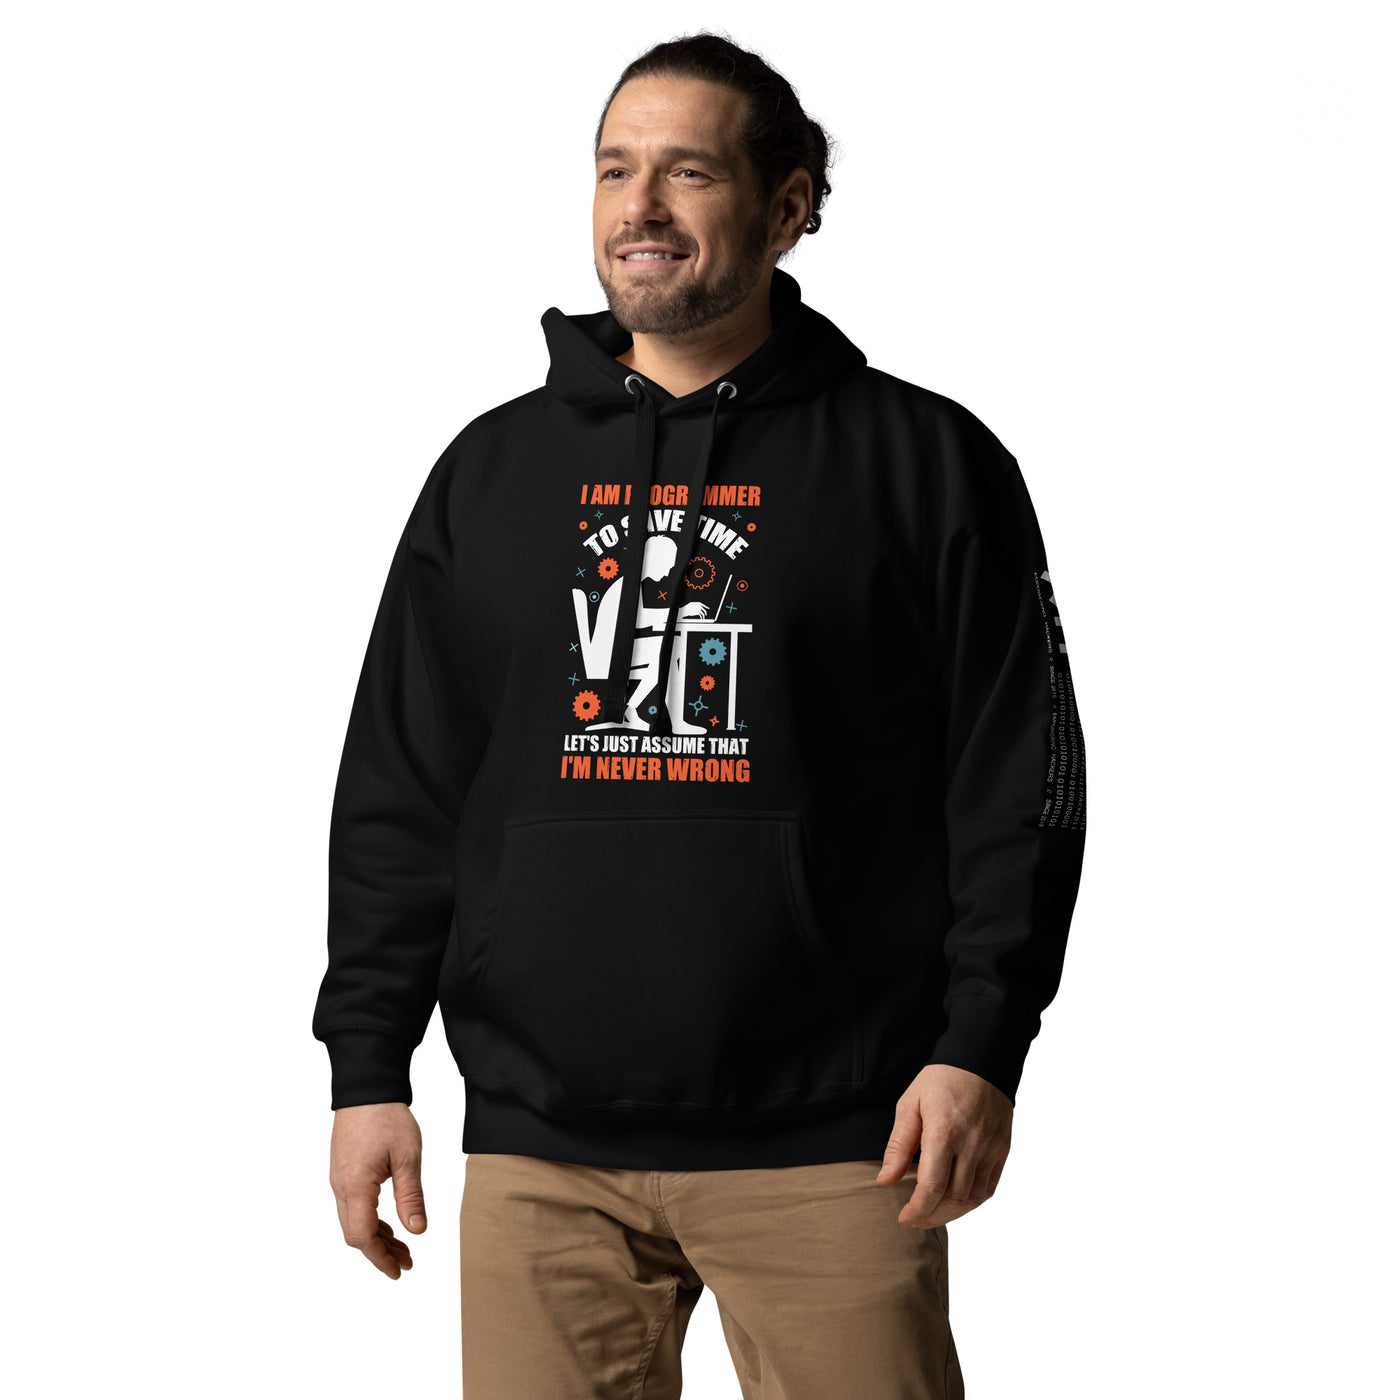 I am Programmer, to Save time, let's just Assume; I am never Wrong - Unisex Hoodie